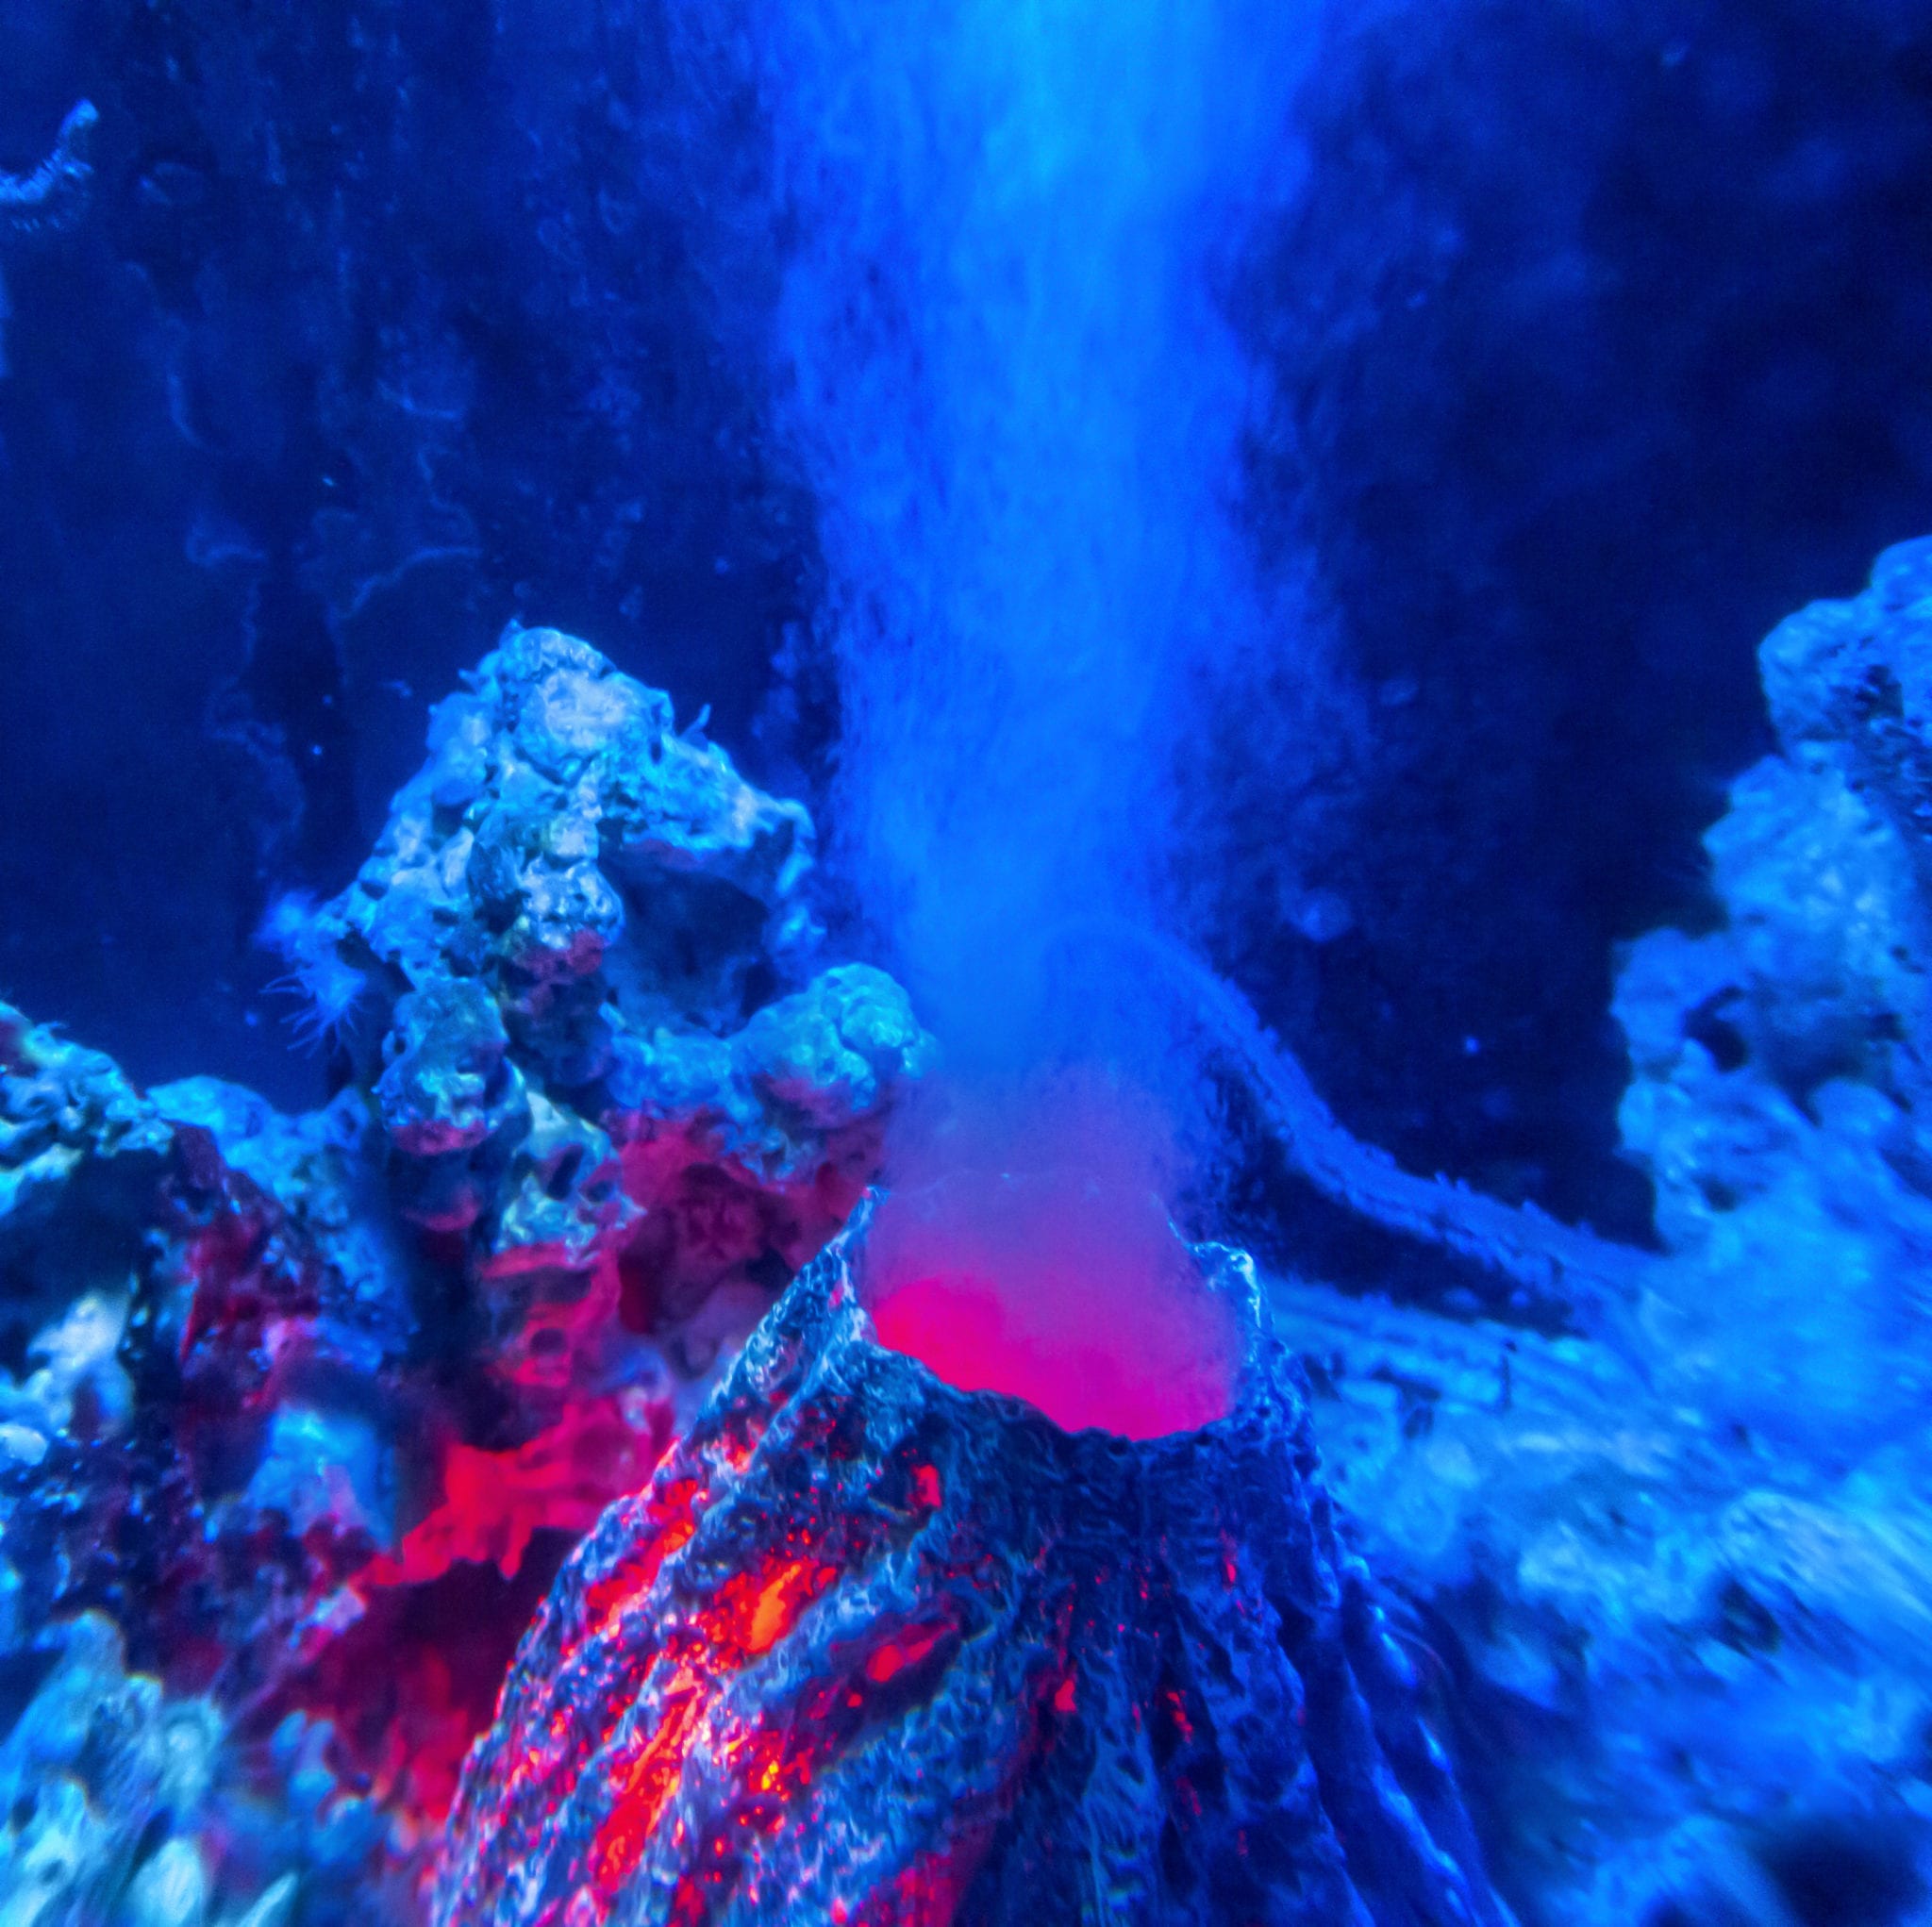 Deepsea volcanic eruptions create megaplumes that may have dispersed